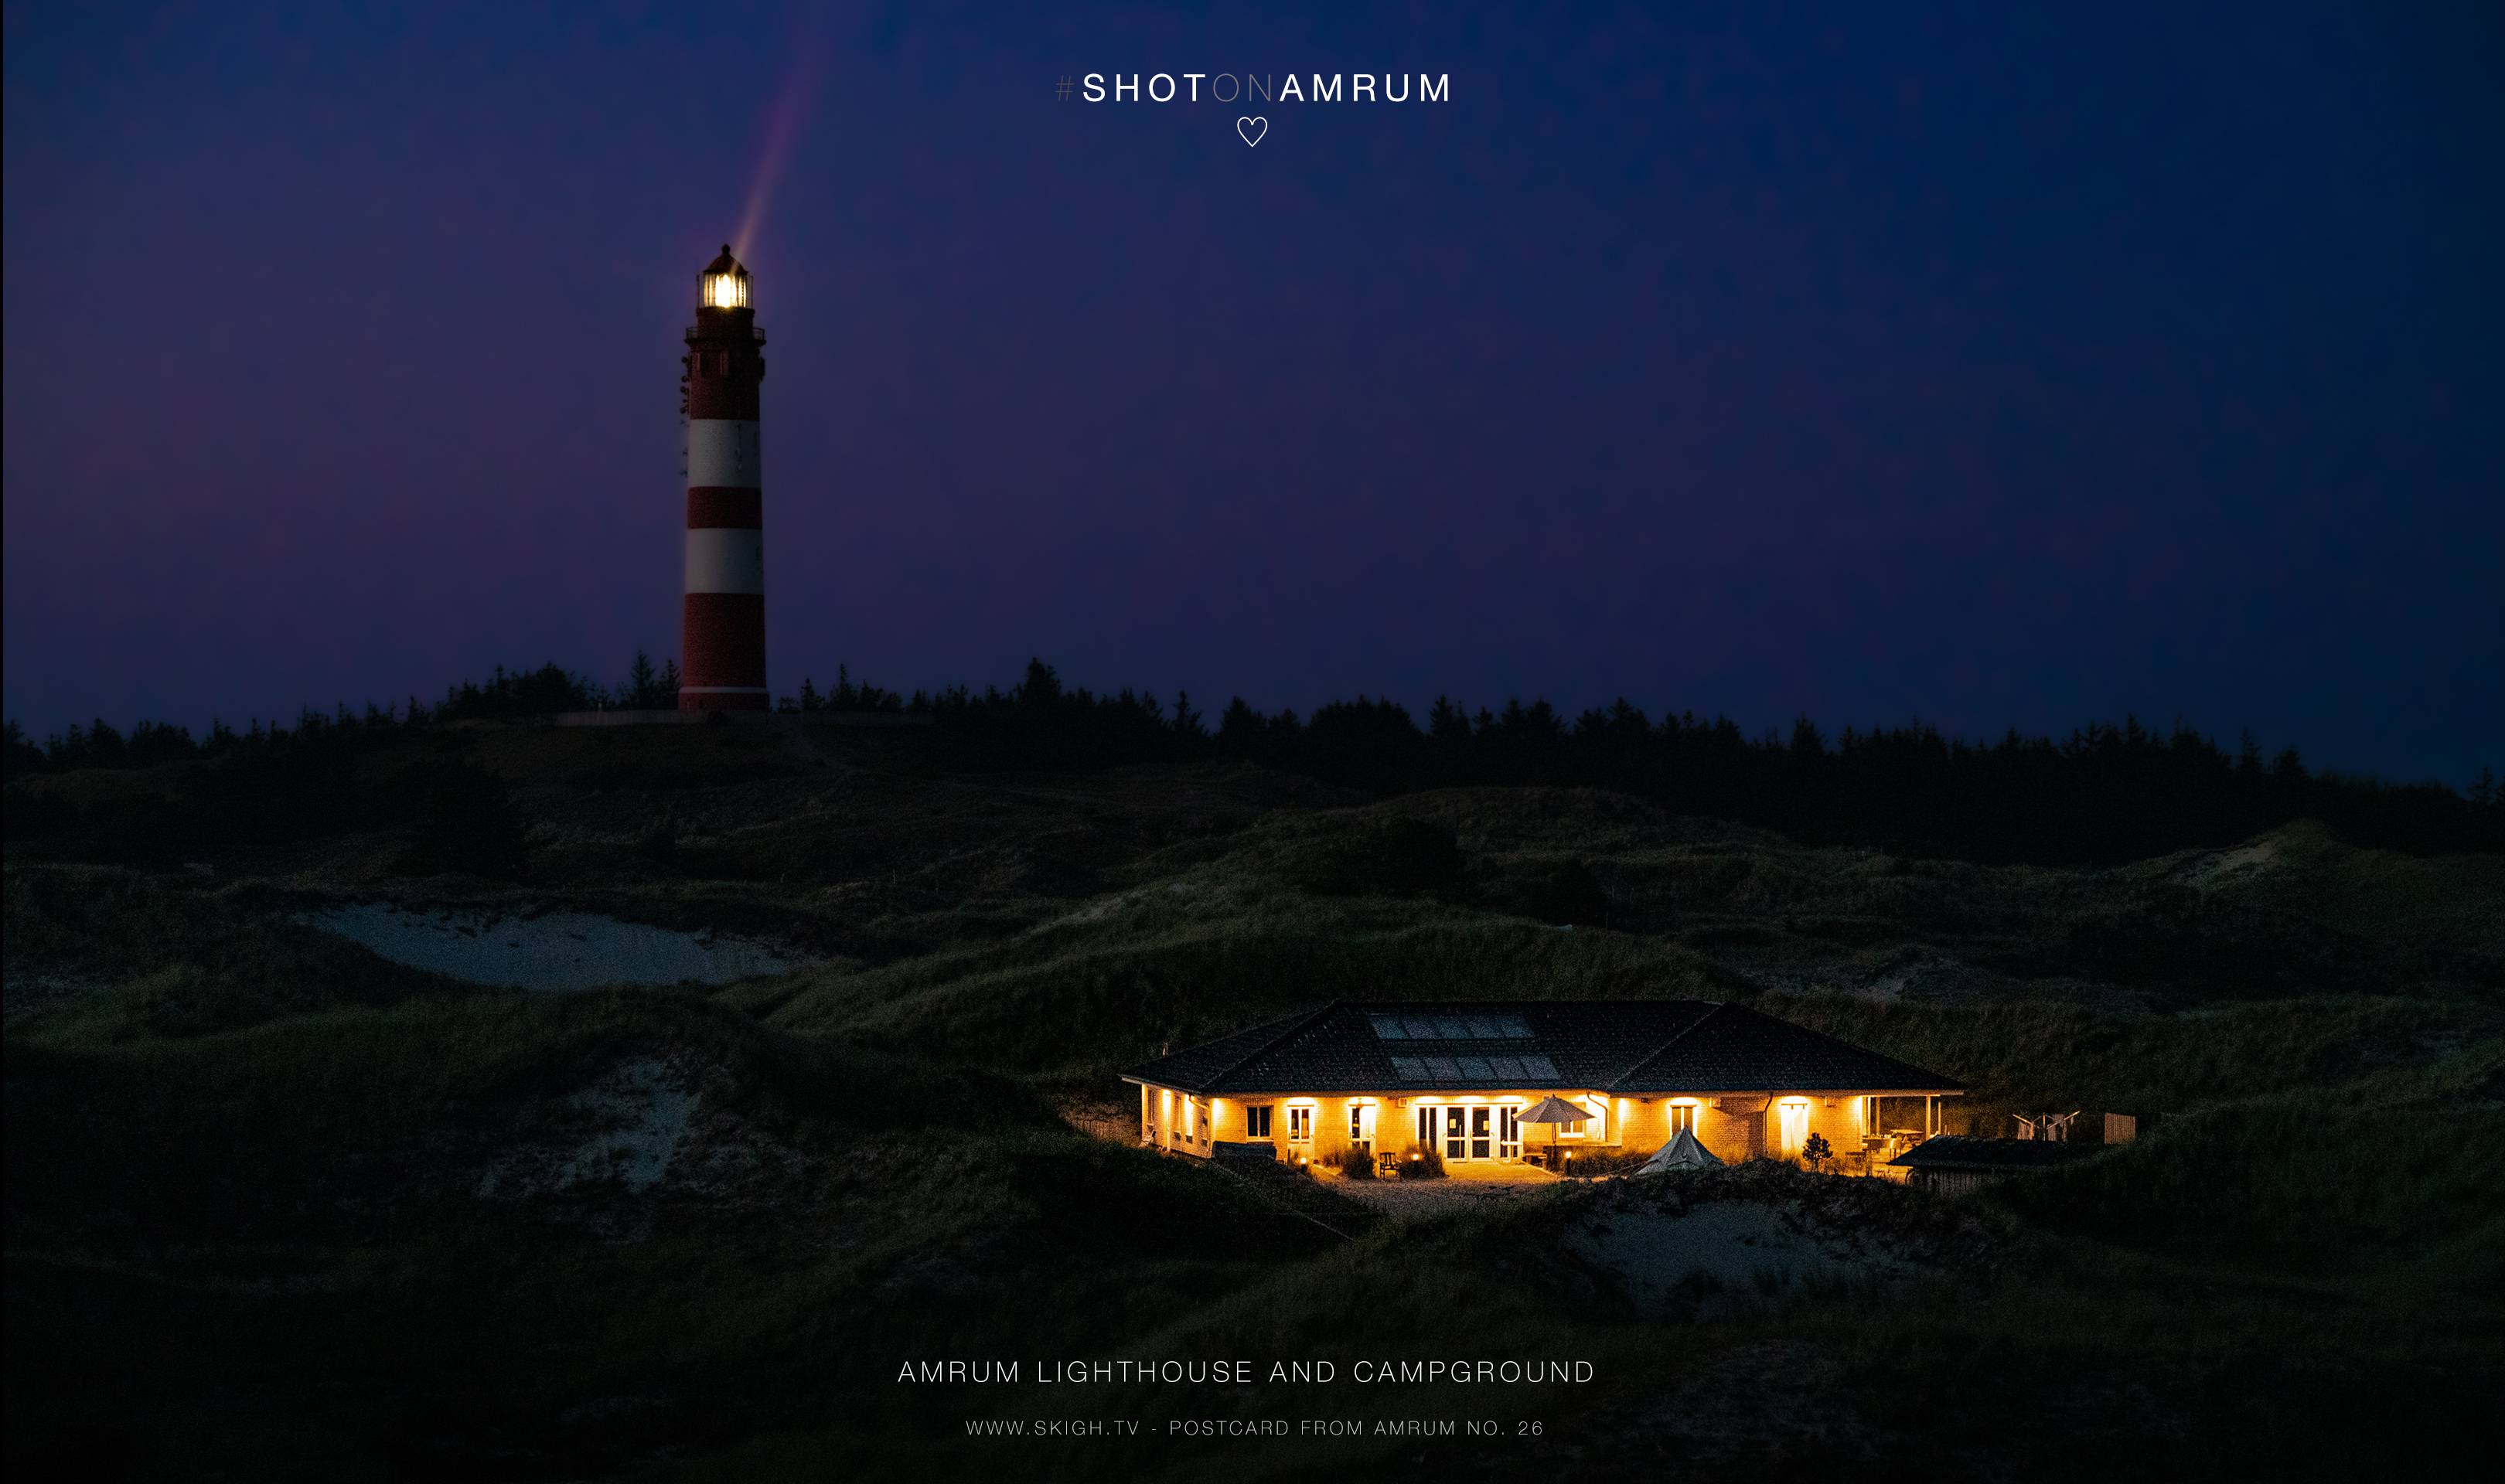 Amrum lighthouse and campground